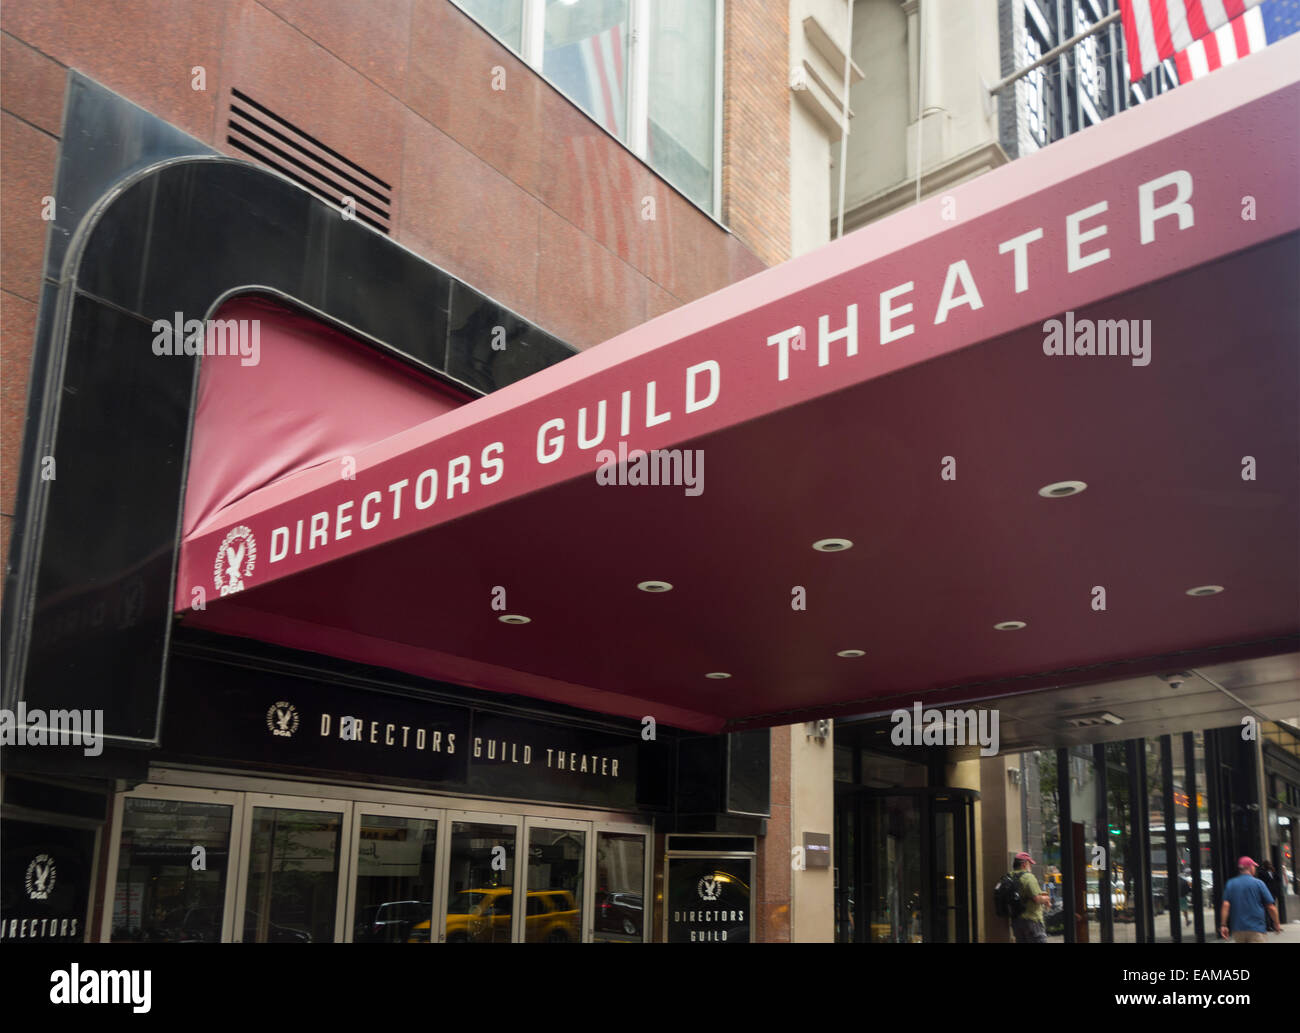 Directors guild of America theater in New York City Stock Photo